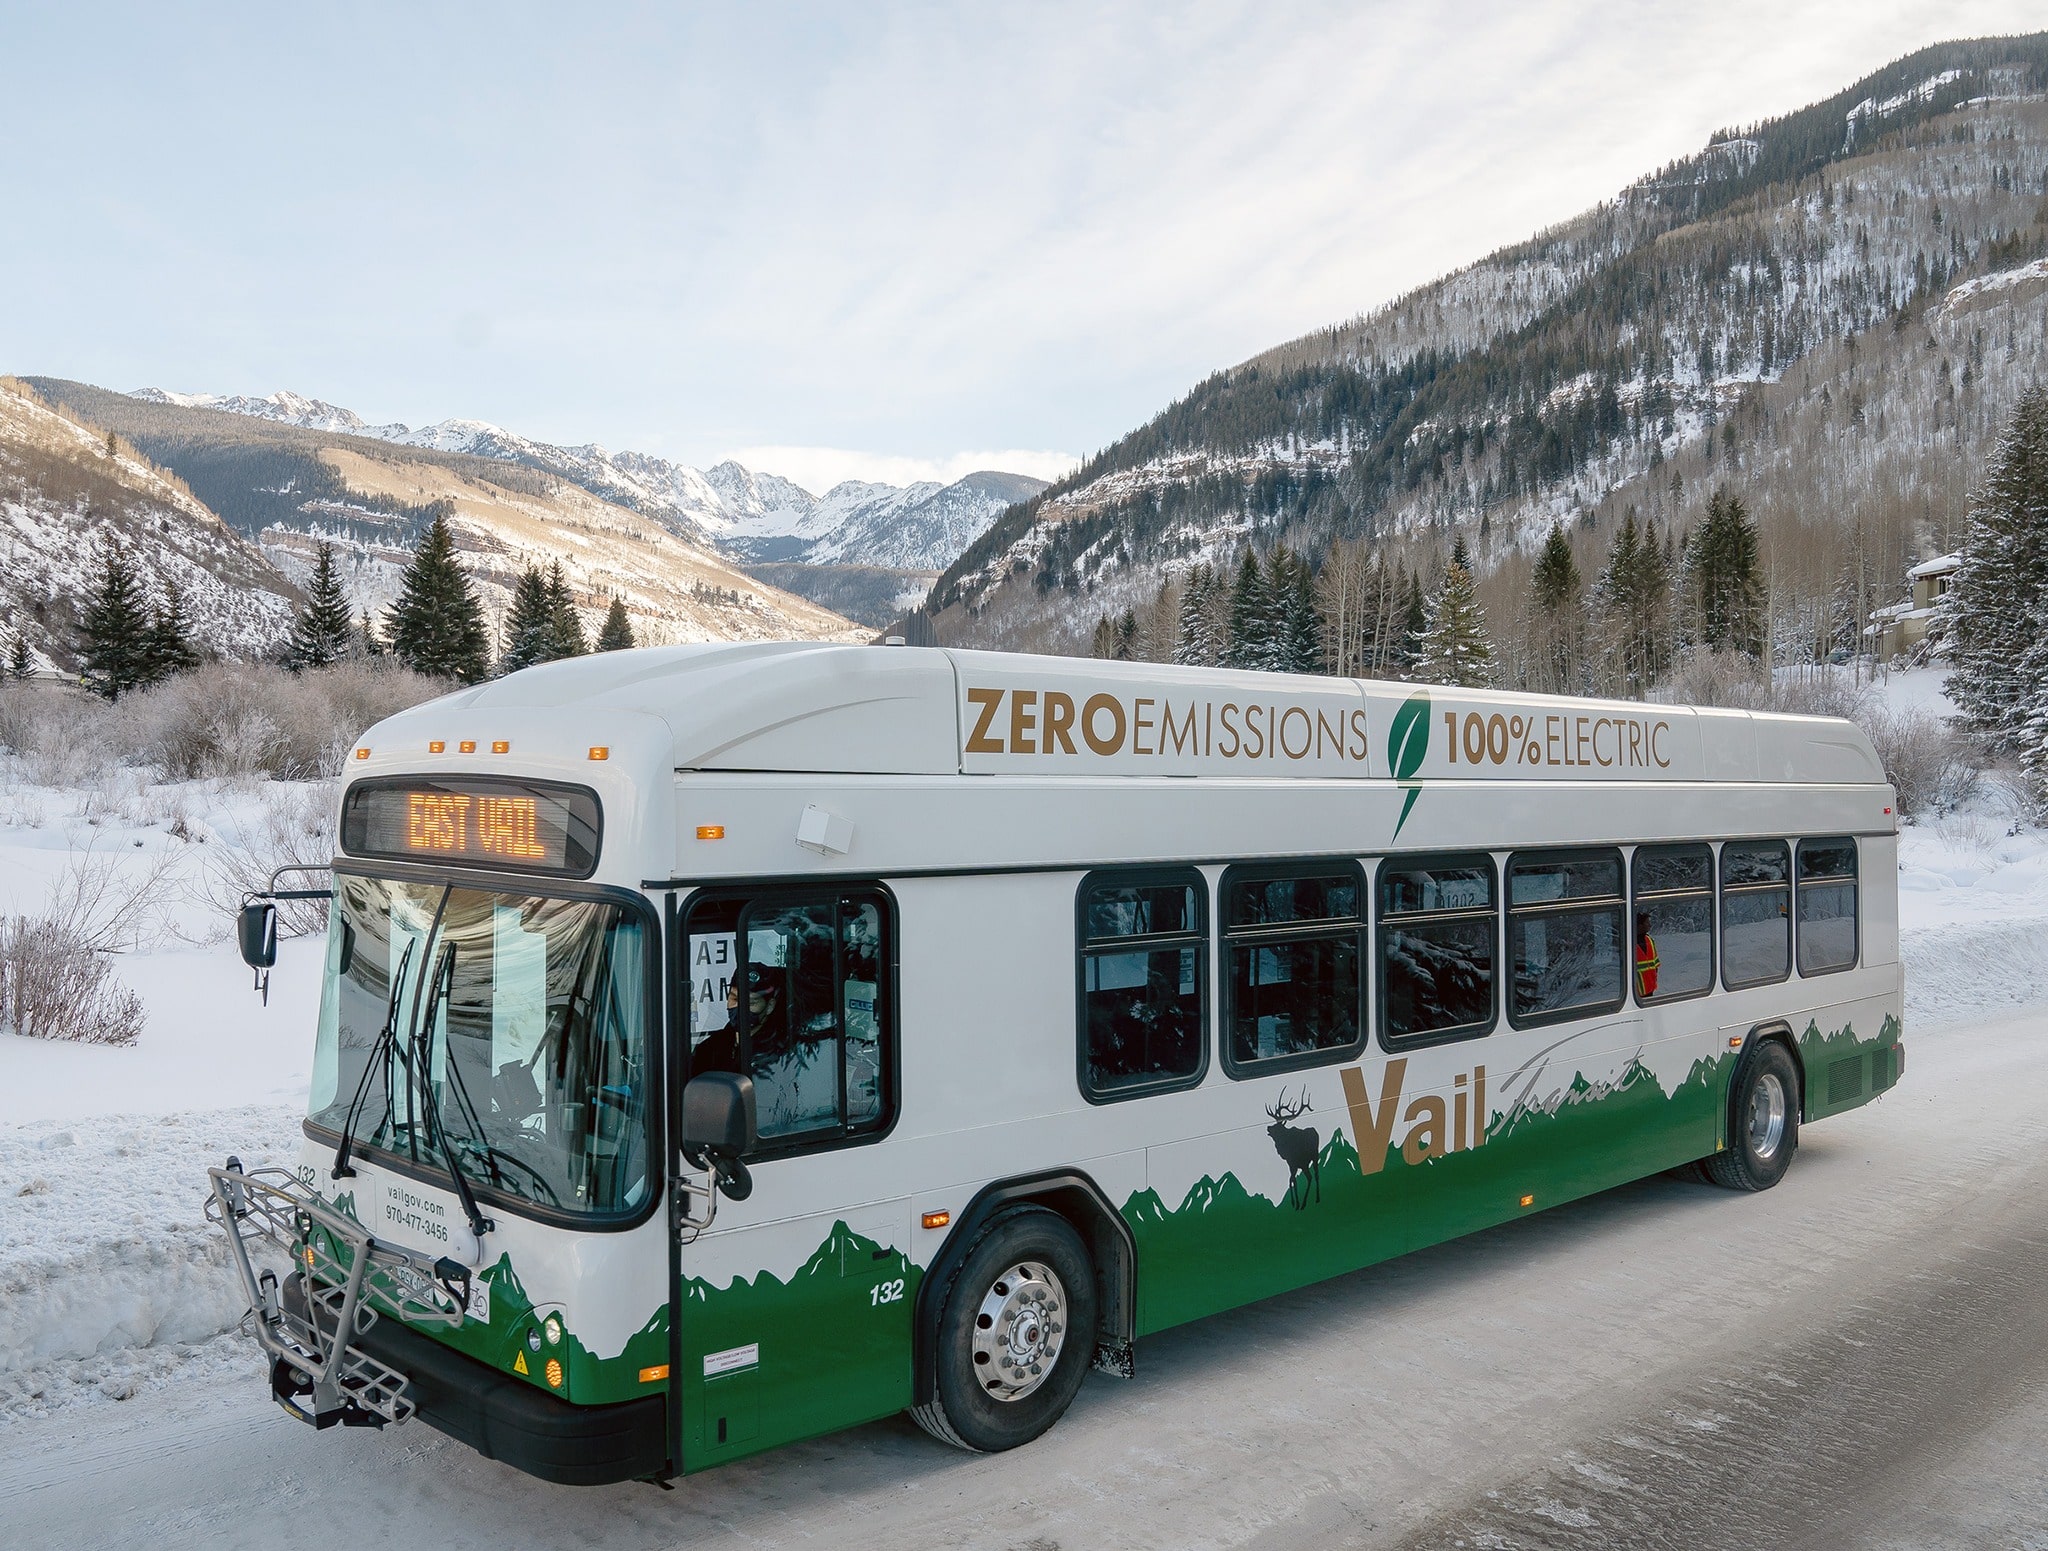 Vail to Receive Clean Transit Grant